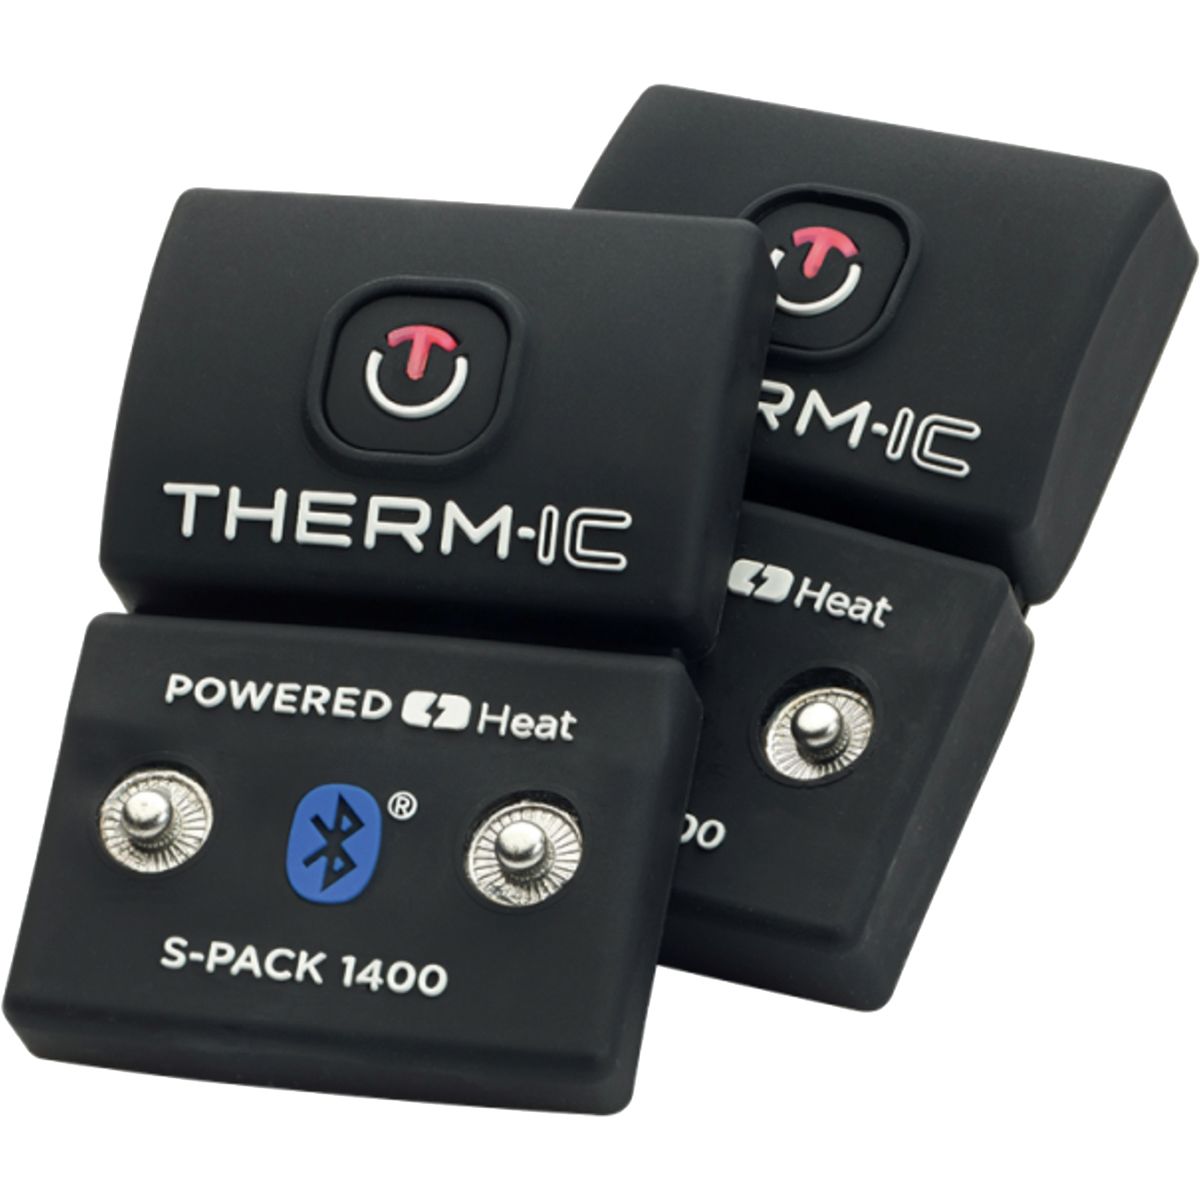 Therm-ic PowerSock S-Pack 1400 Bluetooth